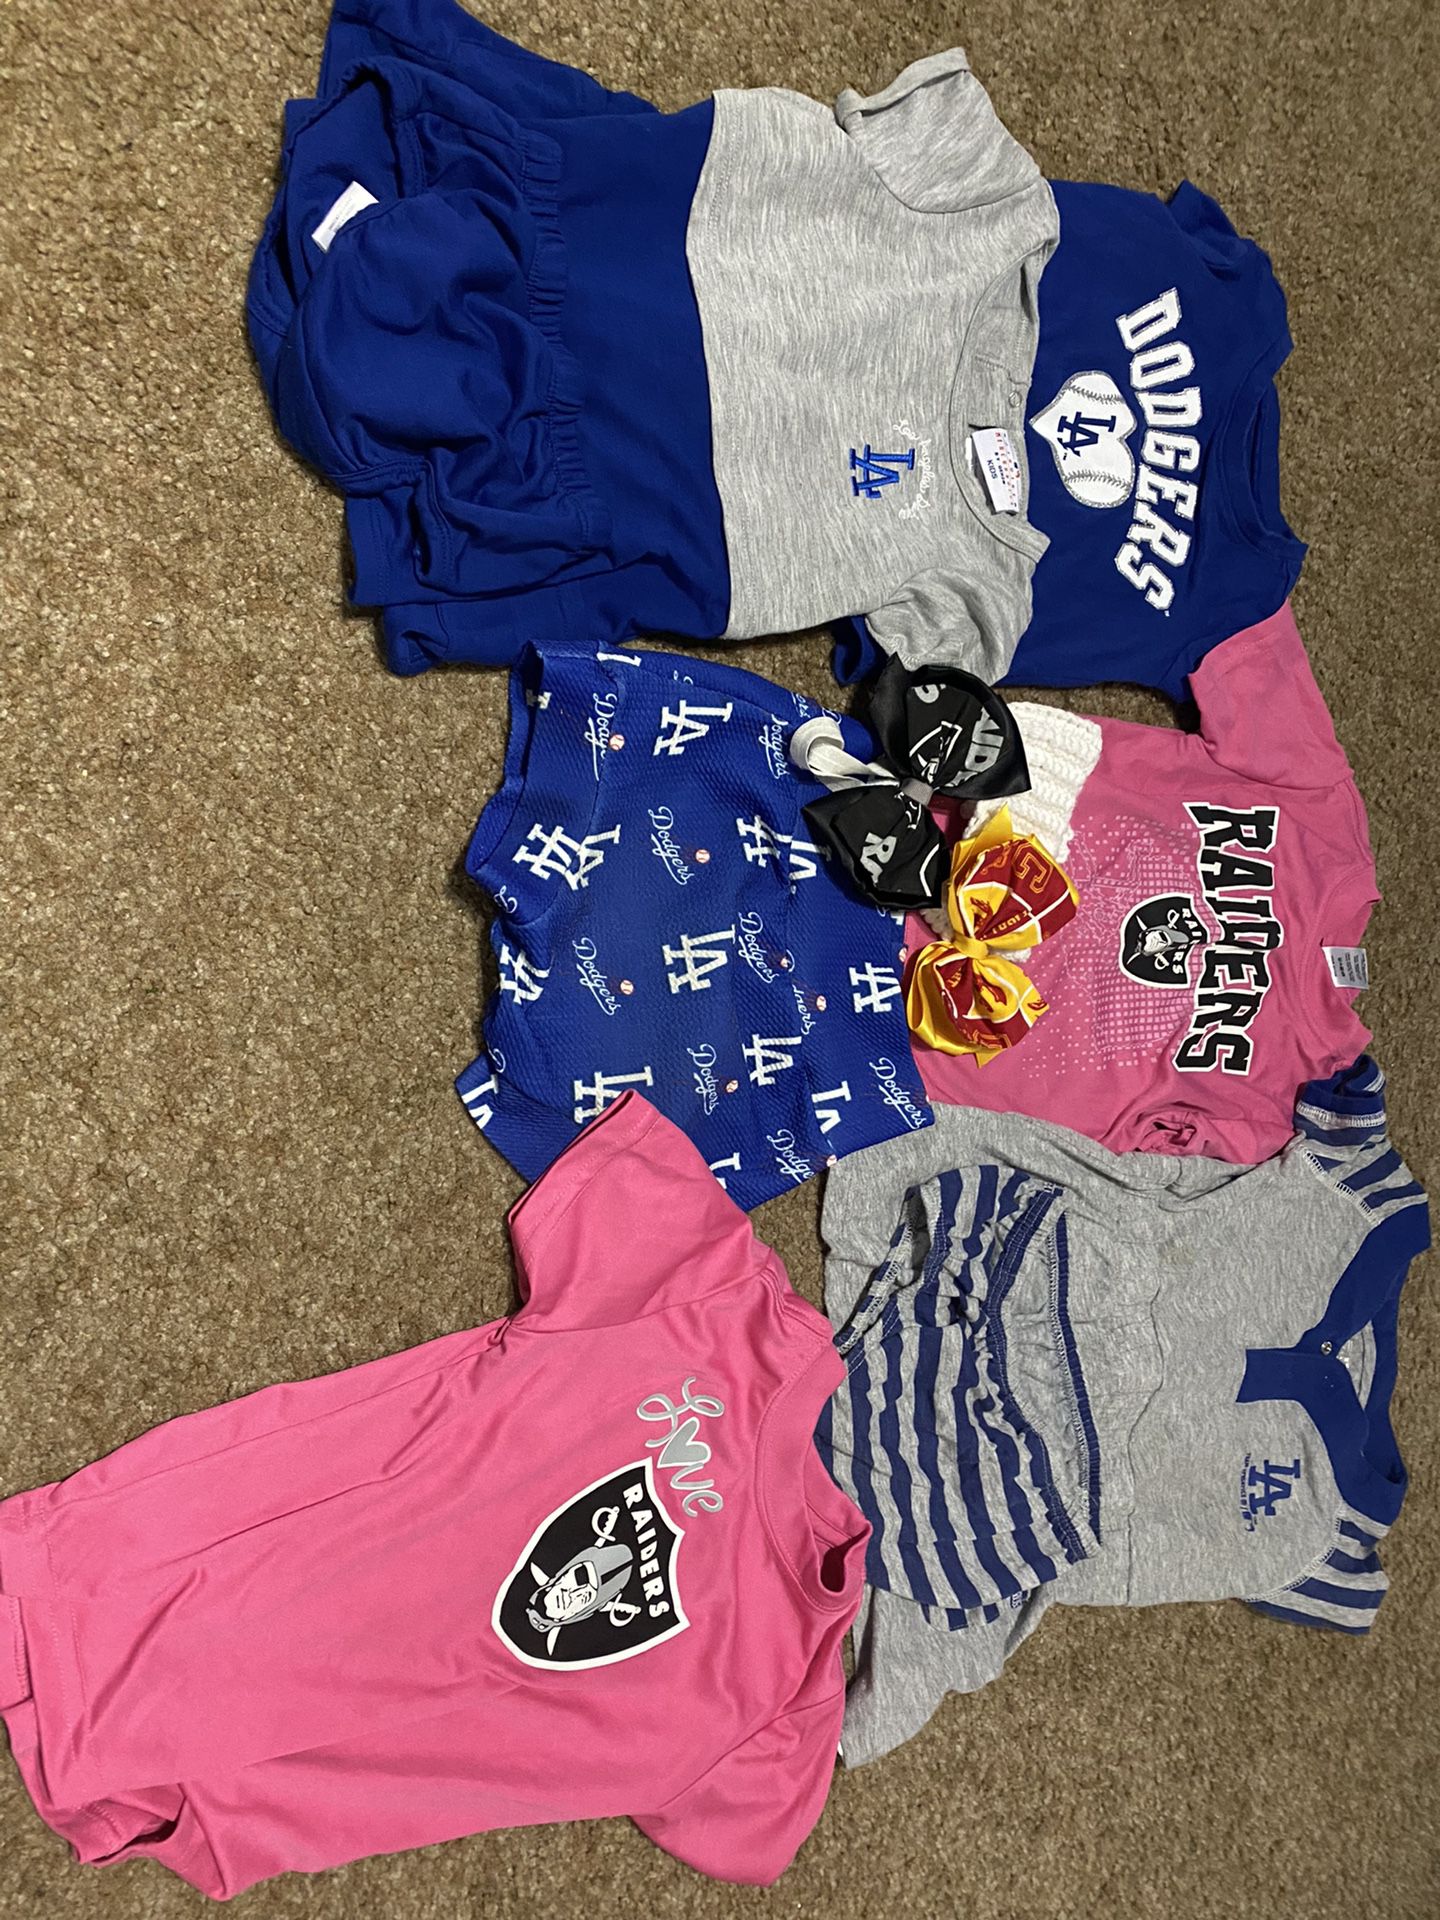 Girl Raider And Dodger Outfits for Sale in Whittier, CA - OfferUp